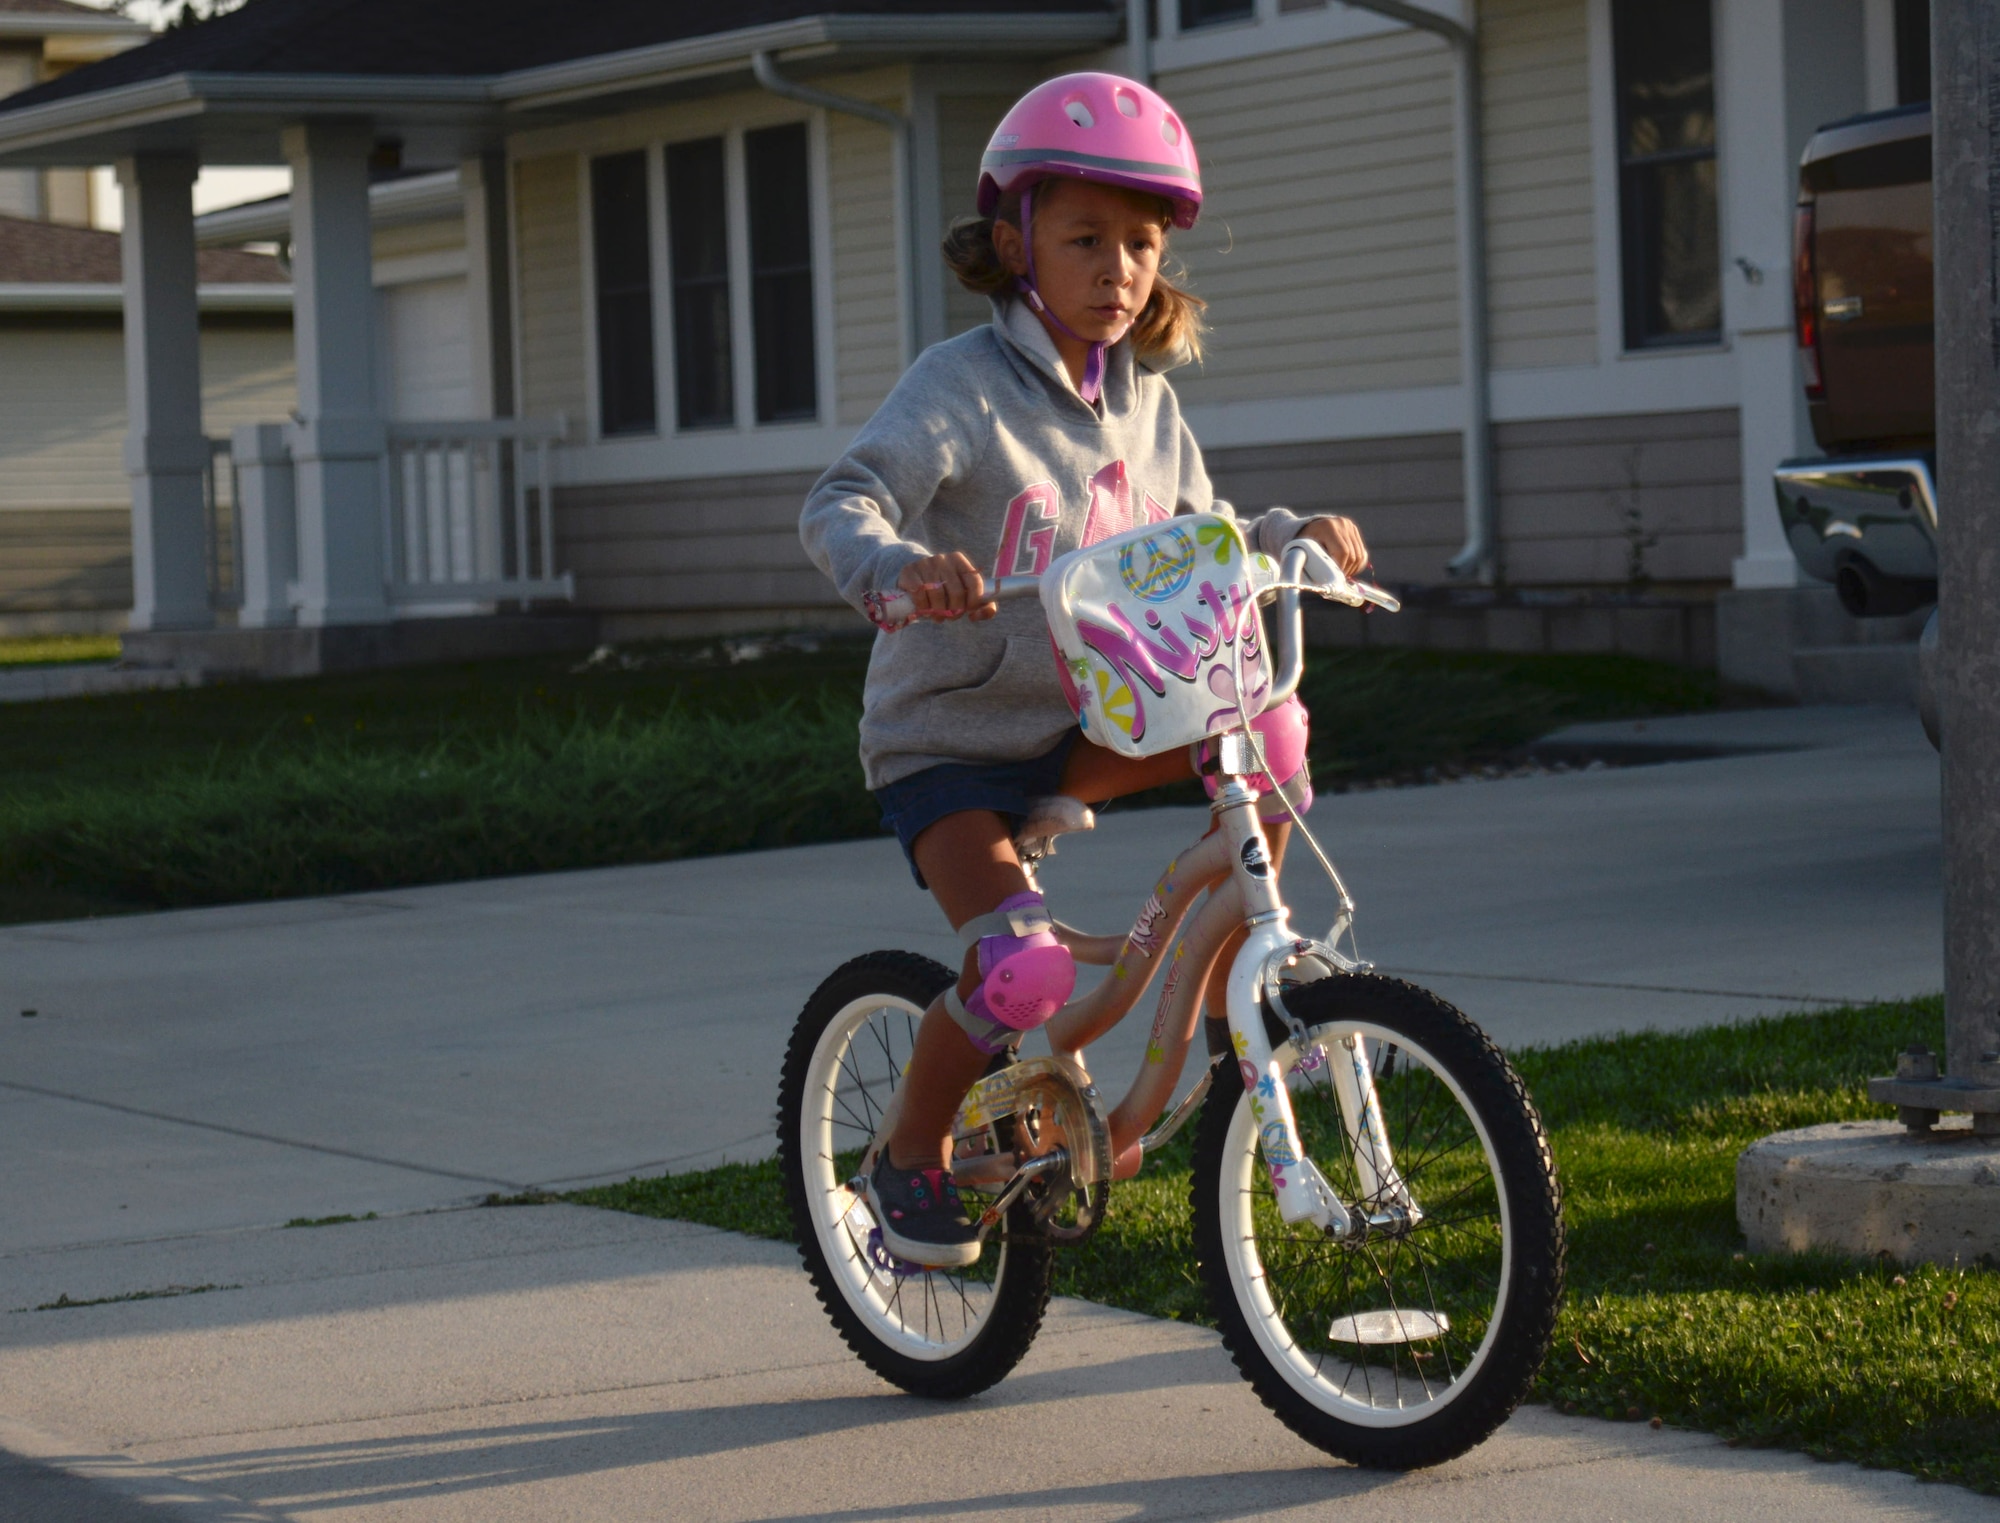 Adryanna Holguin, daughter of Airman 1st Class Teresa Stine, a broadcast journalist apprentice assigned to the 28th Bomb Wing Public Affairs office, rides her bicycle through base housing at Ellsworth Air Force Base, S.D., Aug. 23, 2016. While riding bicycles on base, both children and adults must wear proper safety equipment, including helmets and knee pads. (U.S. Air Force photo by Airman 1st Class Denise M. Jenson)